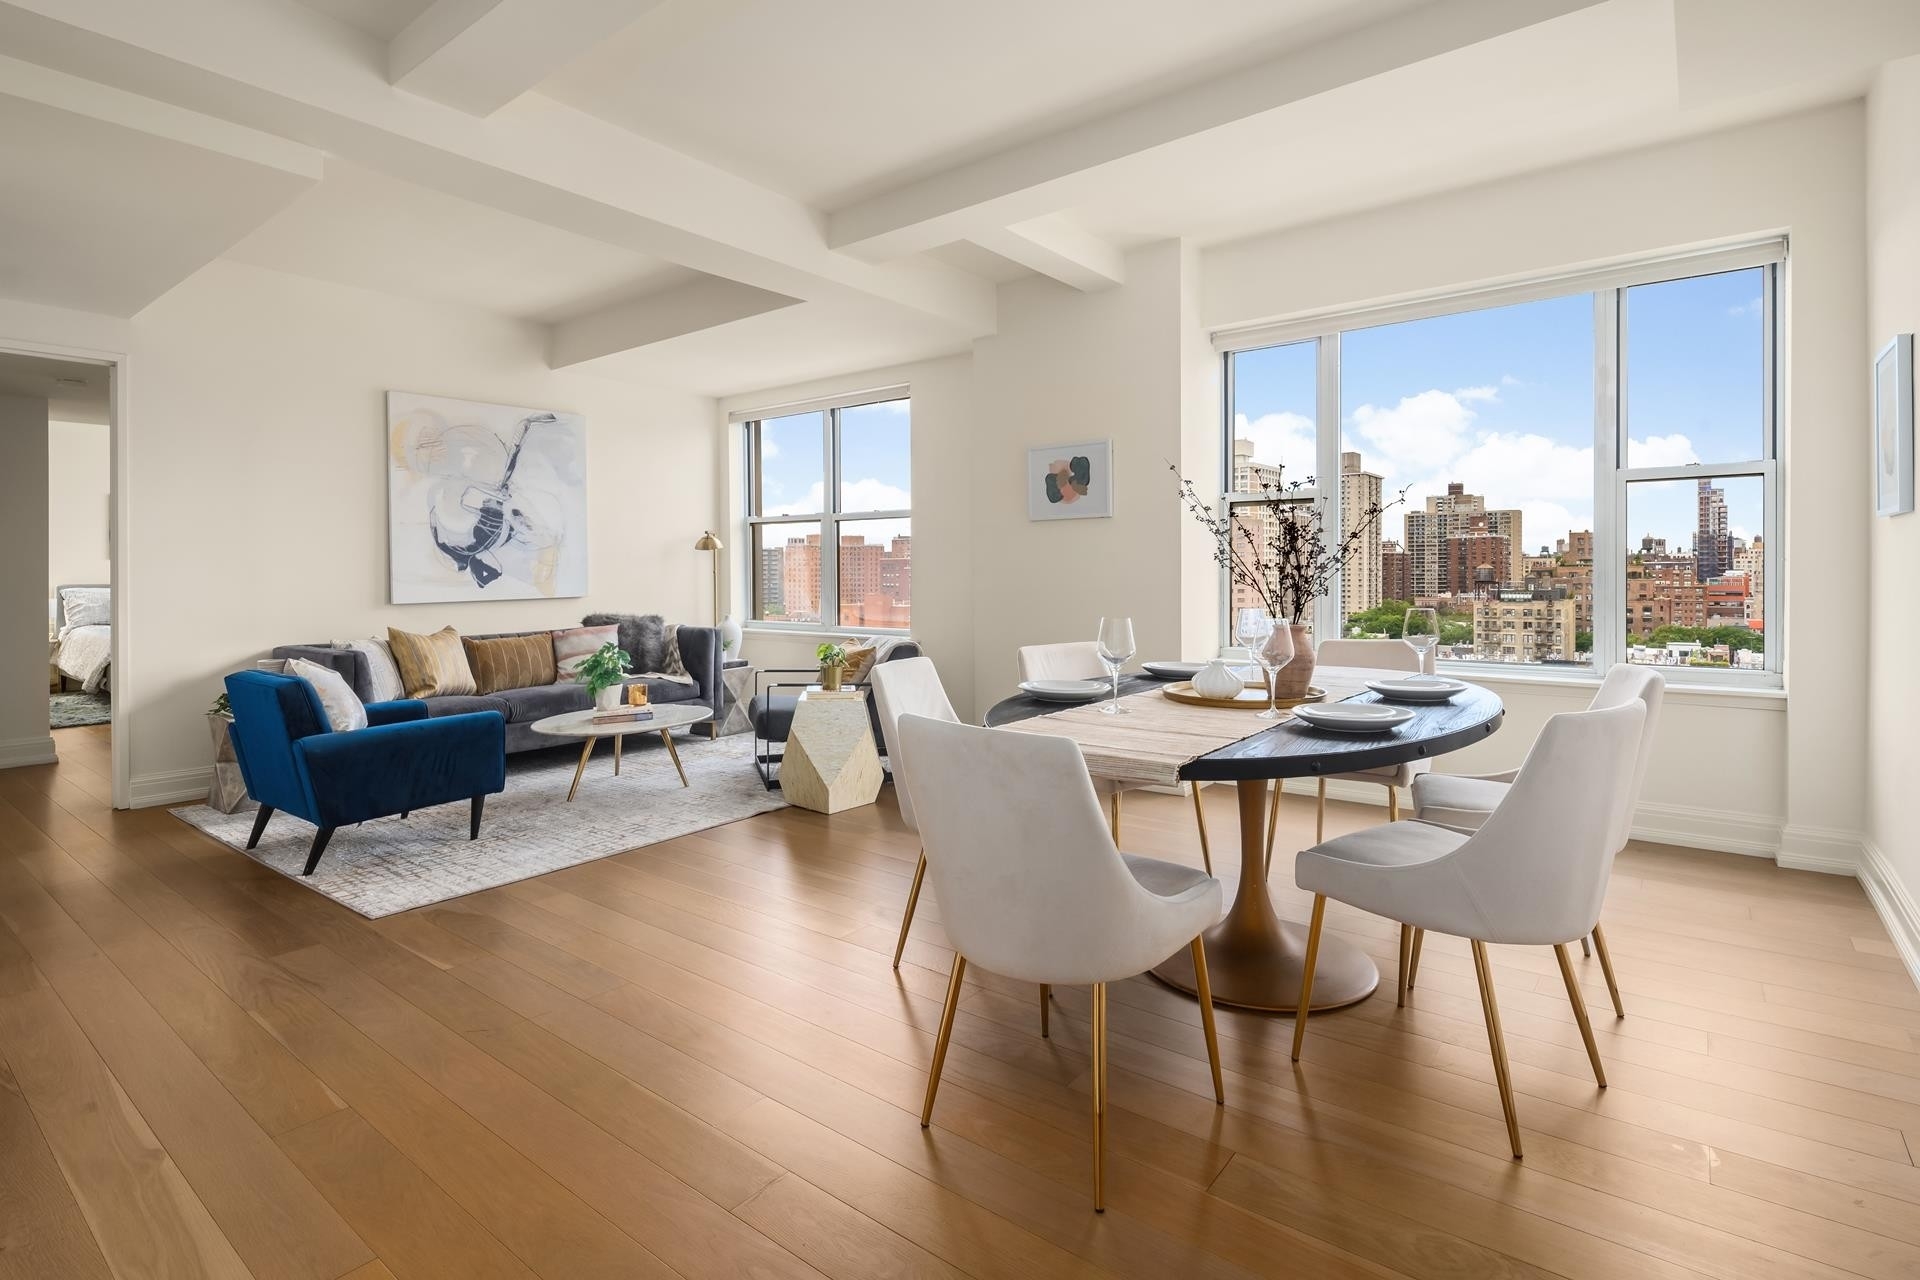 Condominium for Sale at Brewster, 21 W 86TH ST, 15G Upper West Side, New York, NY 10024